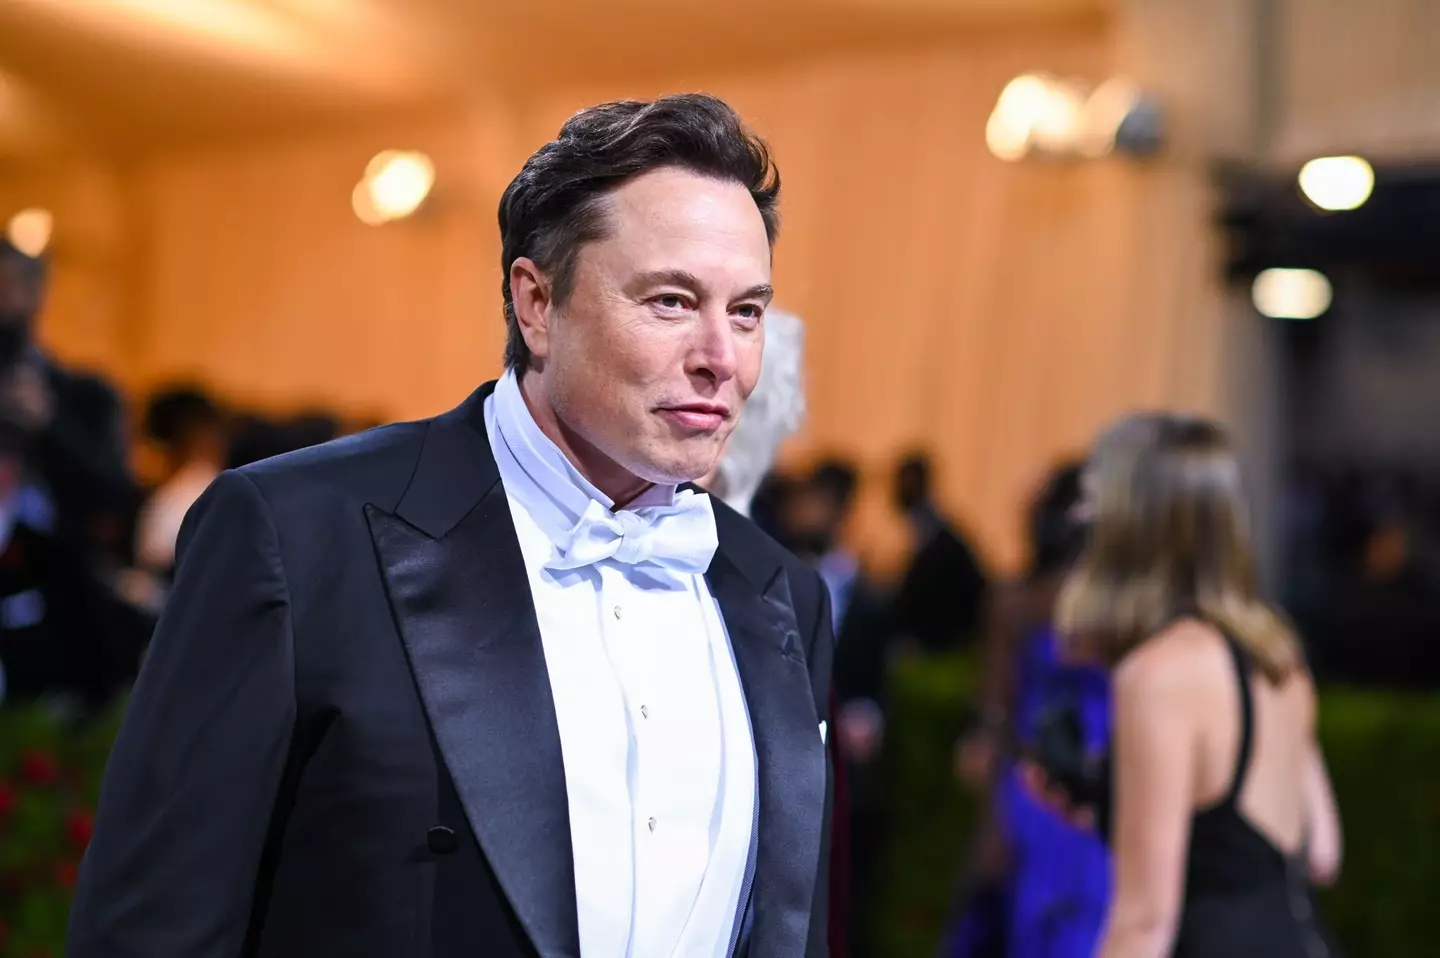 Elon Musk has strongly denied the sexual assault allegation made against him.